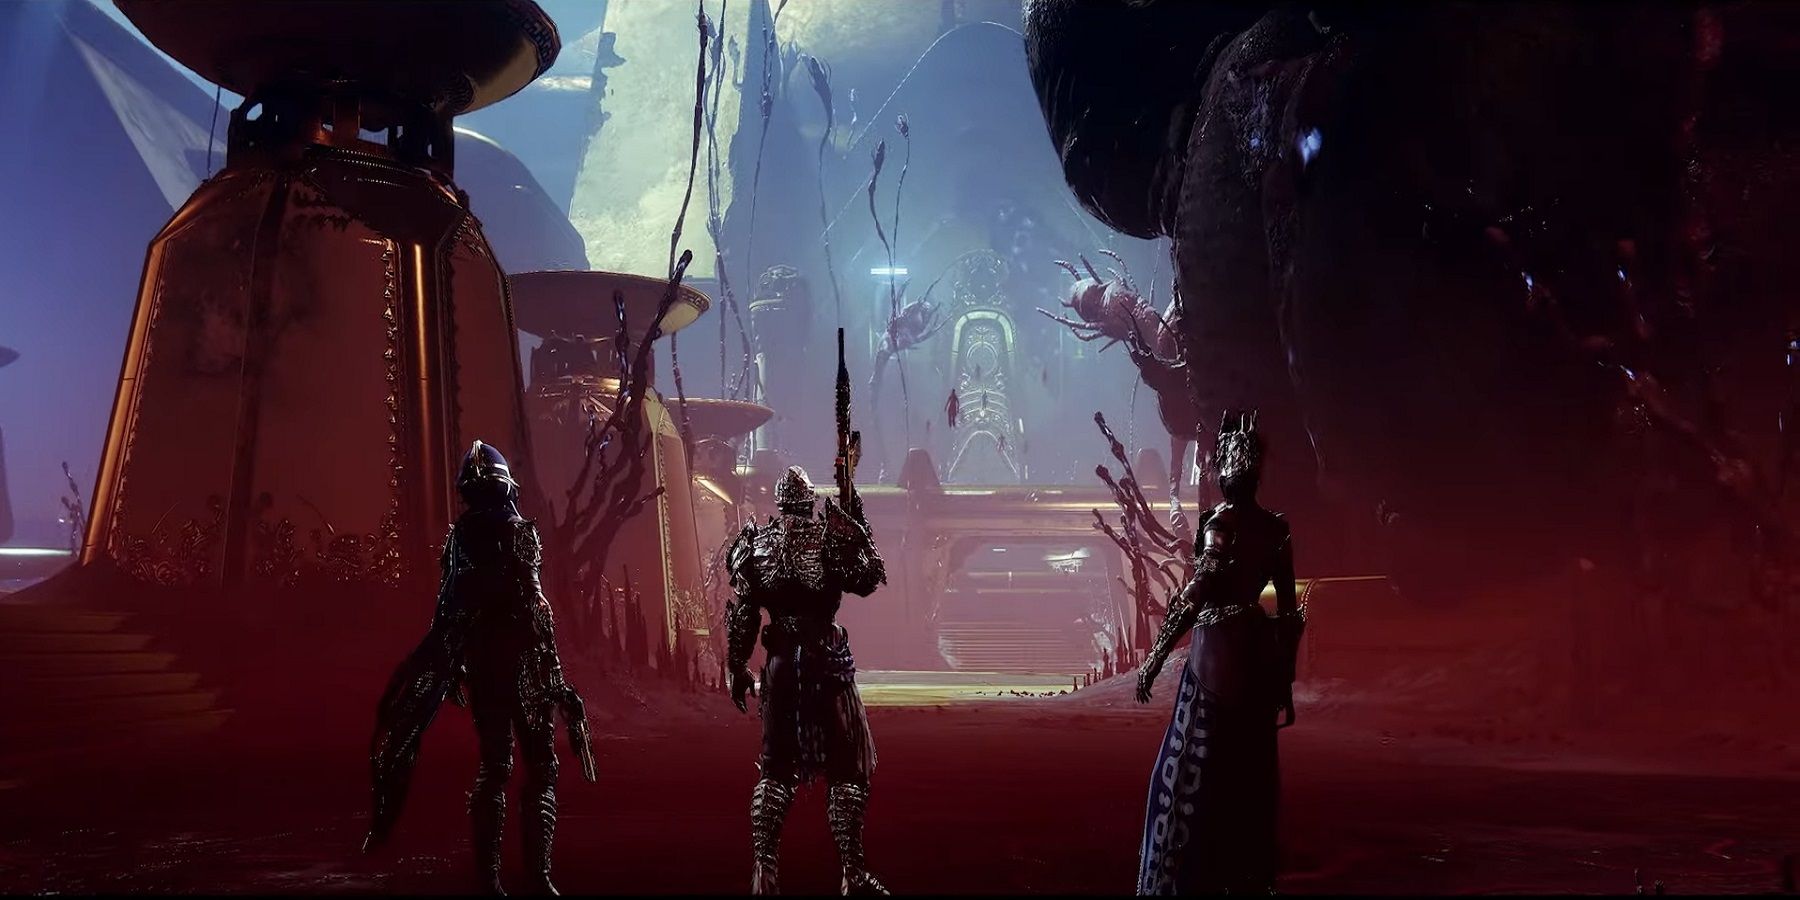 The Leviathan returns in the next season of Destiny 2, Season of the Haunted.